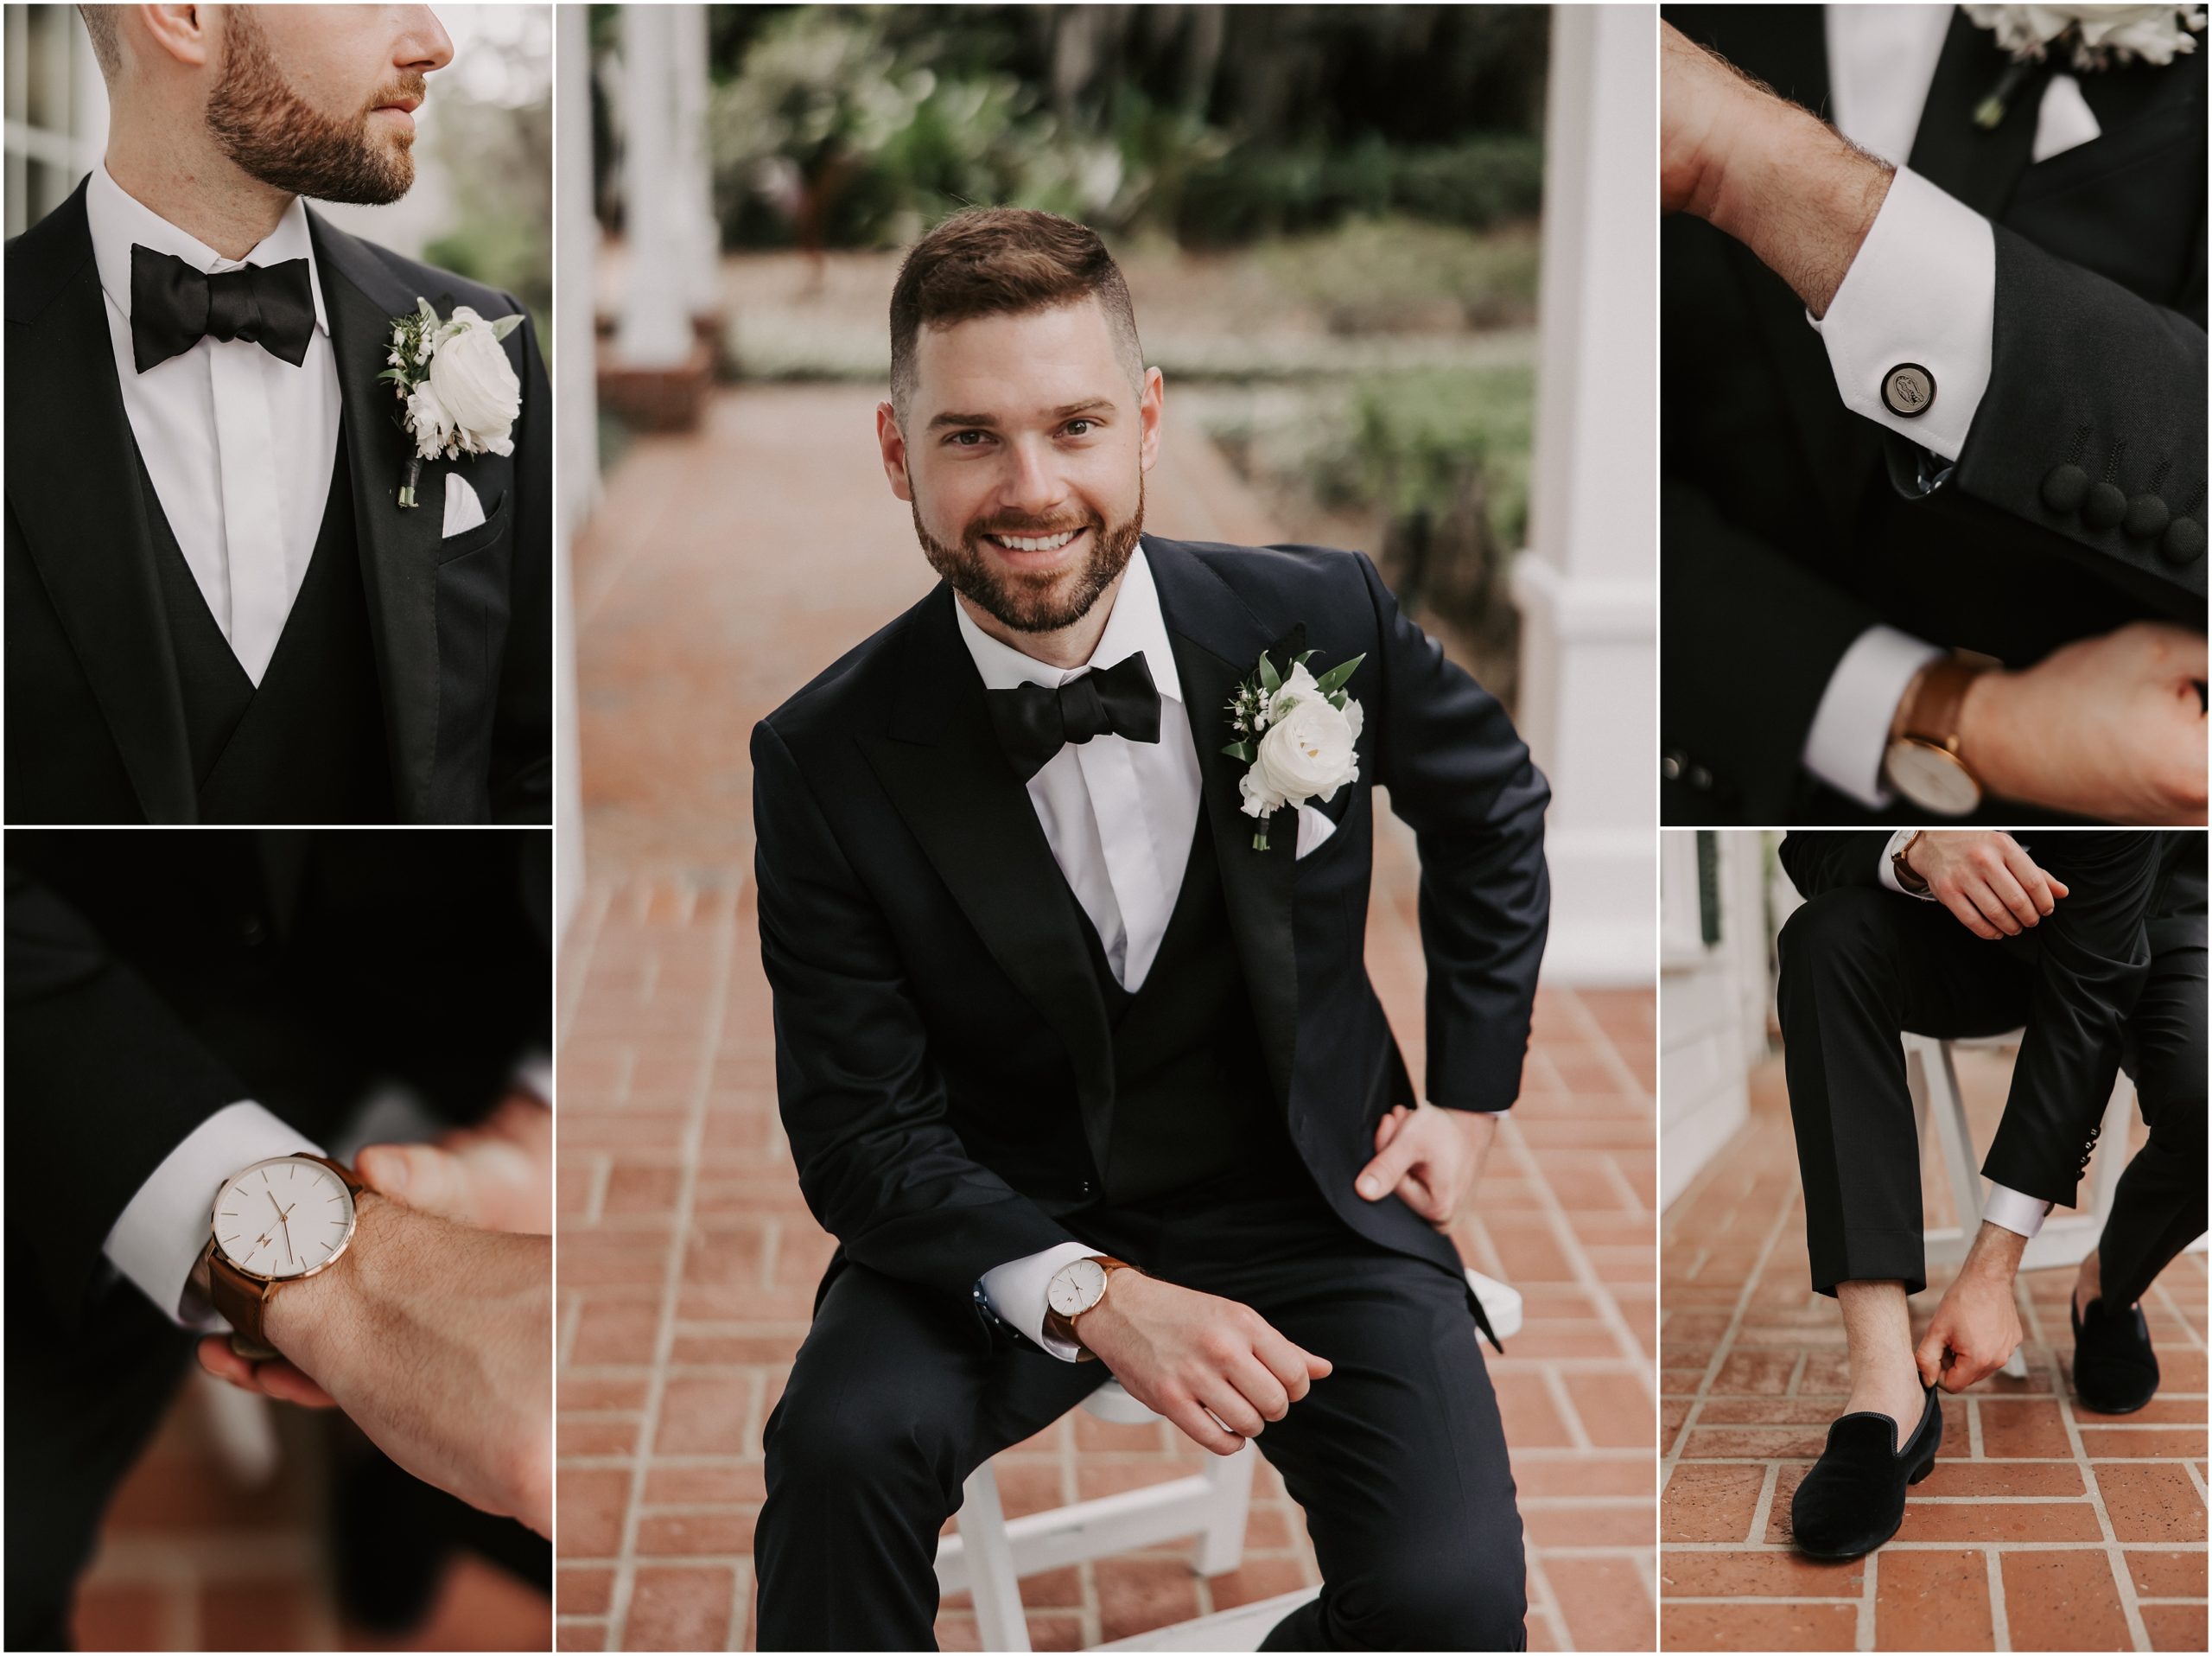 For their distinguished garden wedding, the dapper groom wore a classic suit from Leonardo 5th Avenue with a plain black loafer style driving shoes from Crockett & Jones that gave a special touch to his attire.